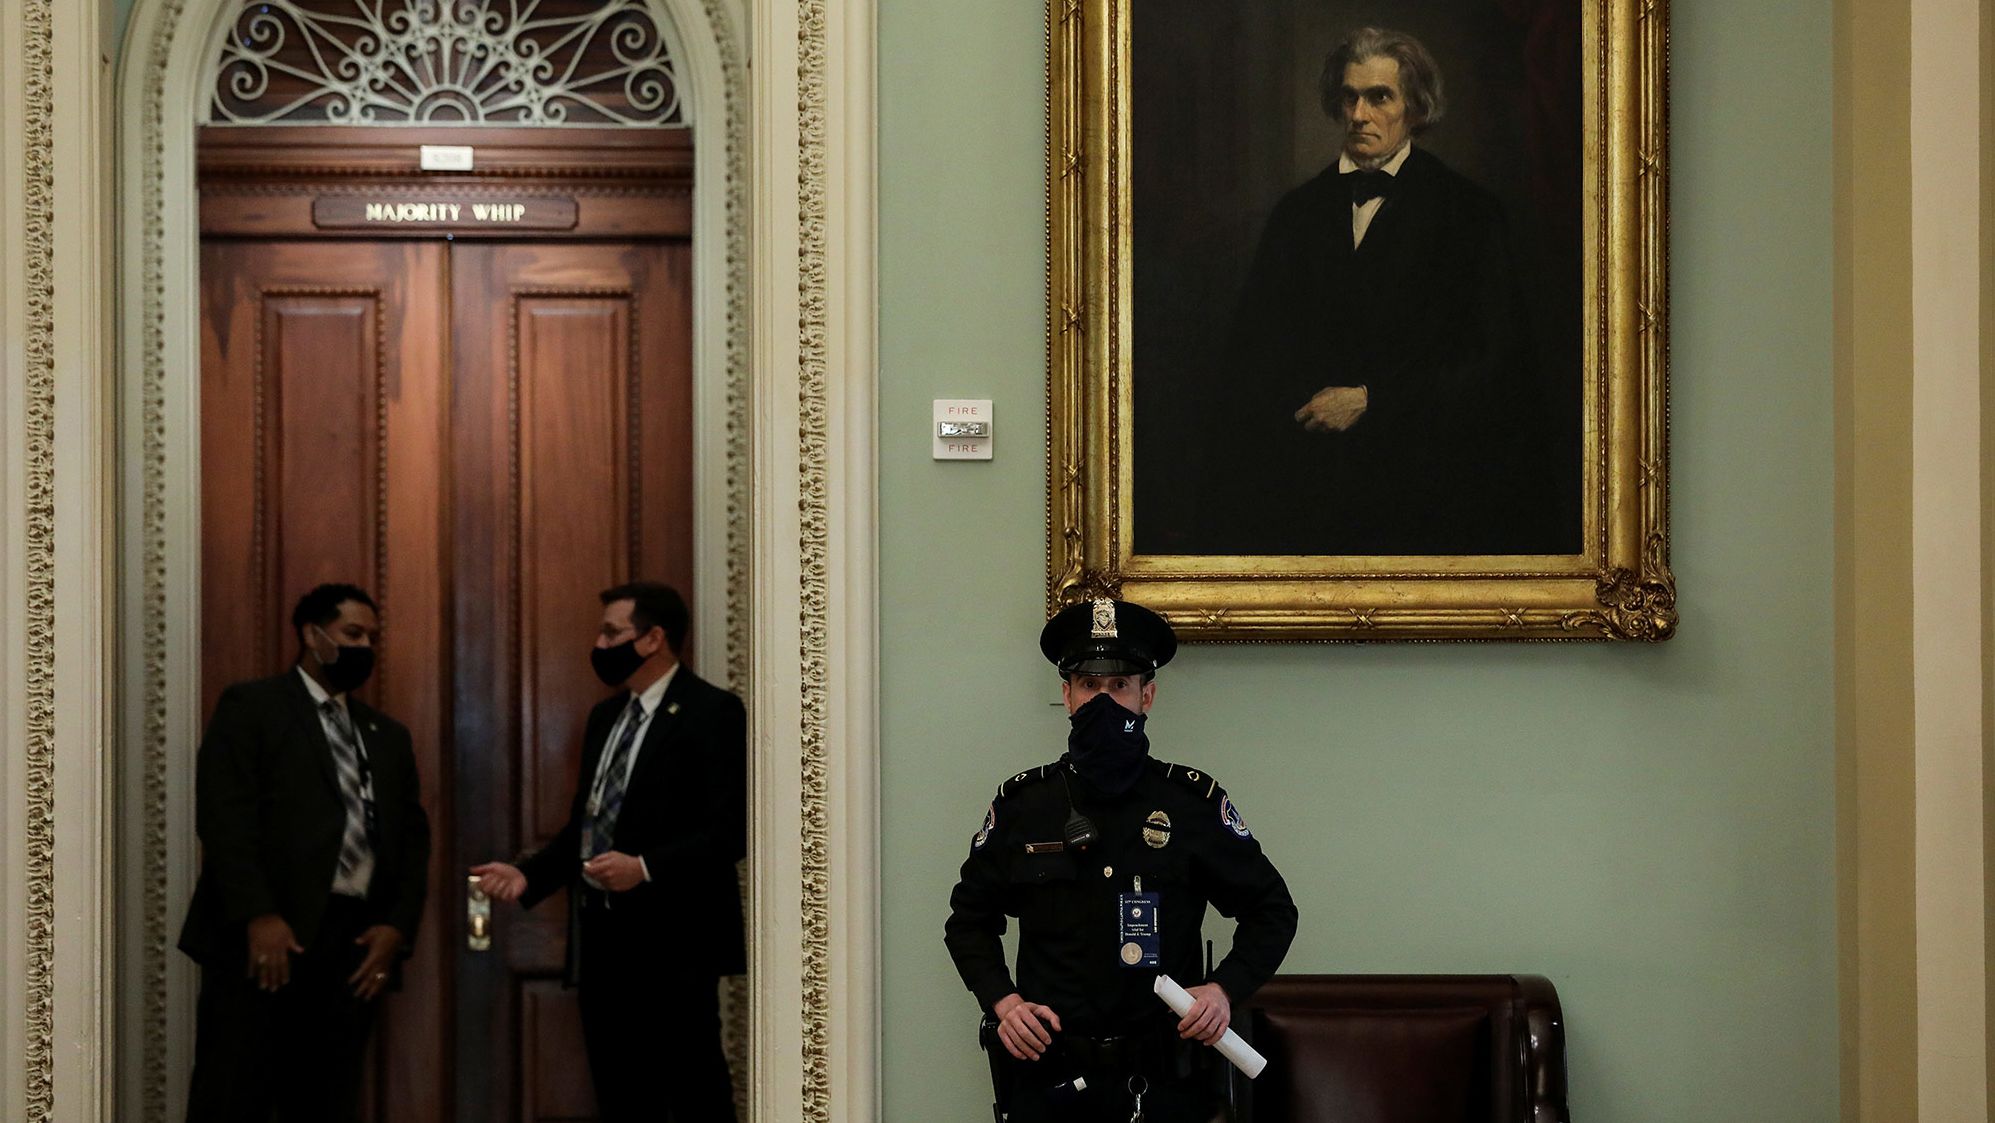 A Capitol Police officer stands watch as senators arrive at the Senate Chamber on Tuesday.